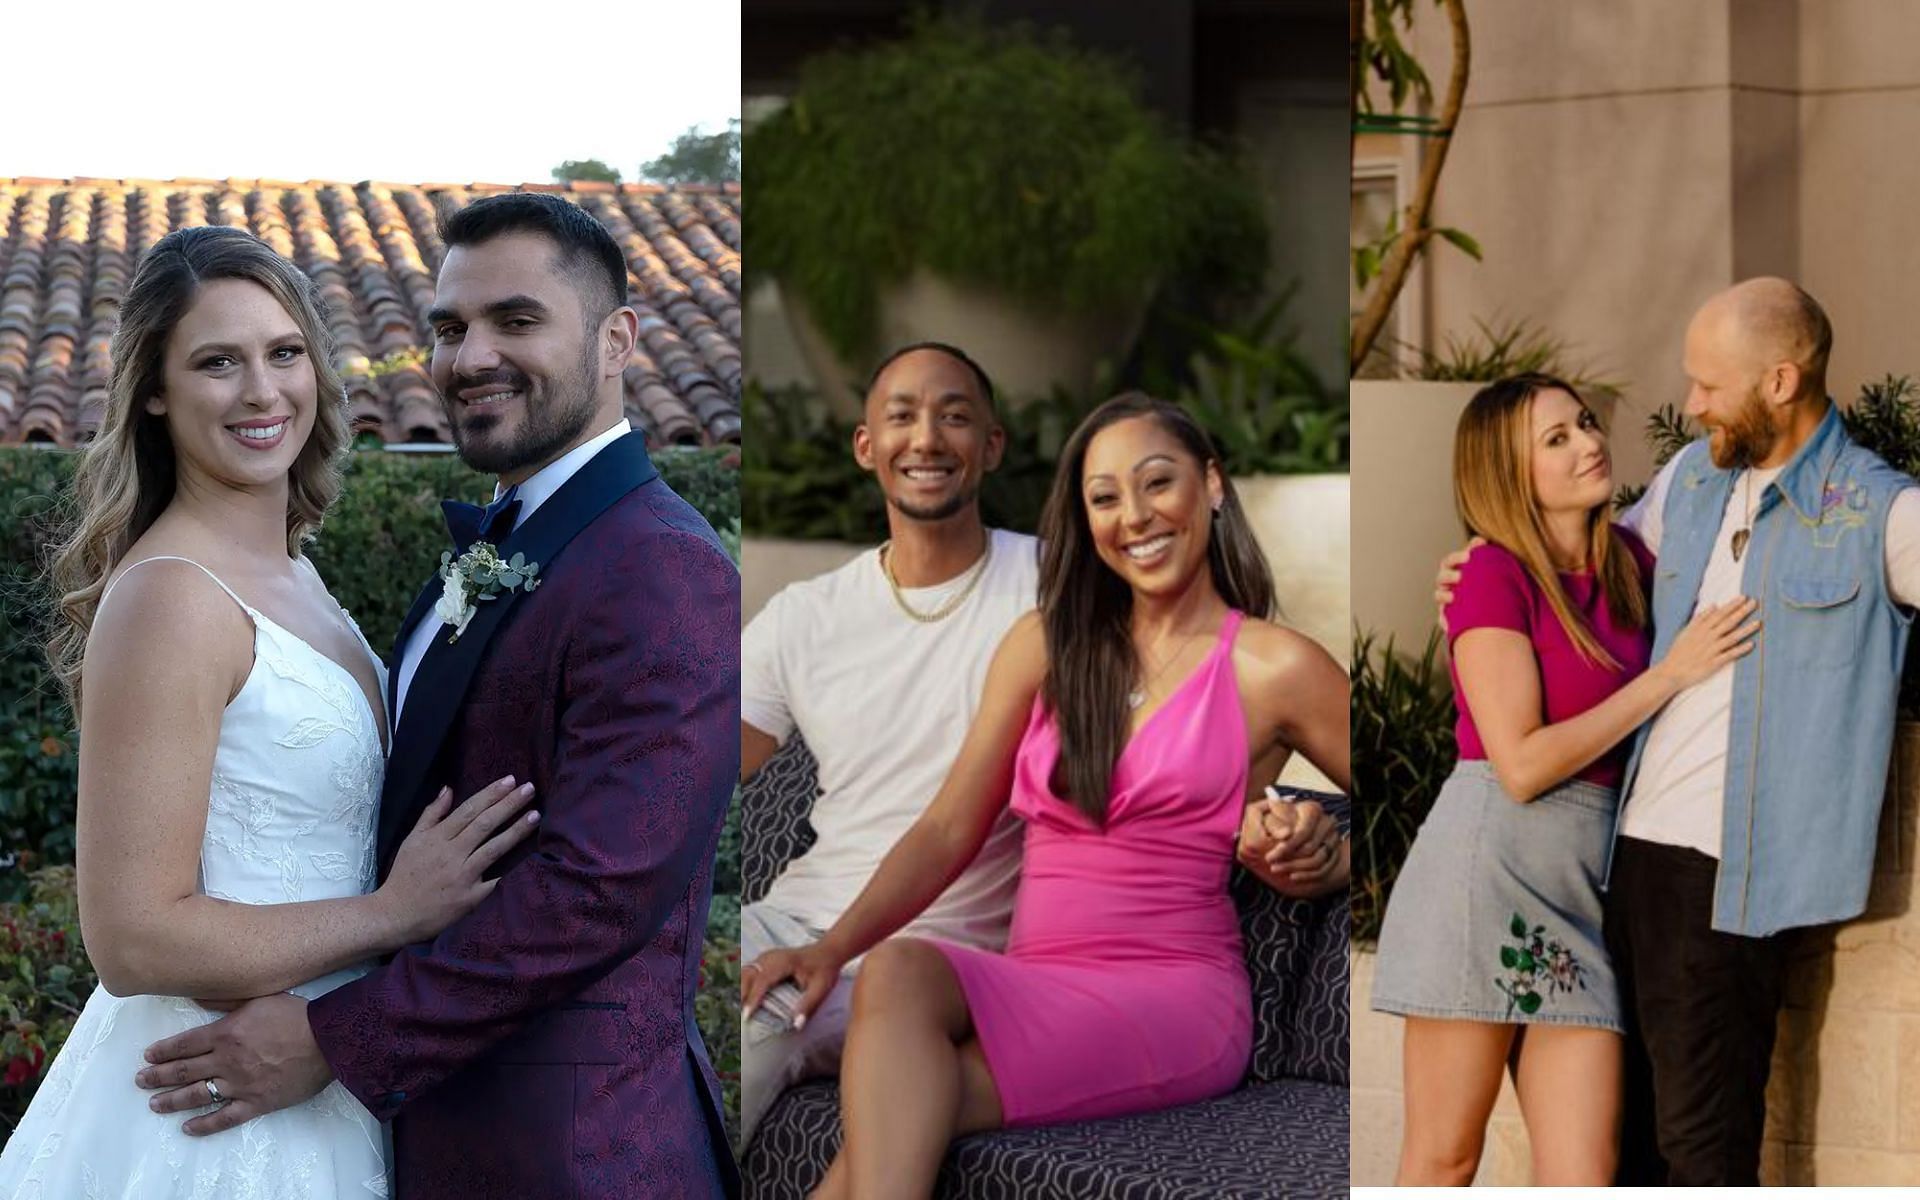 Two couples get divorced on Married at First Sight decision day (Images via Lifetime)